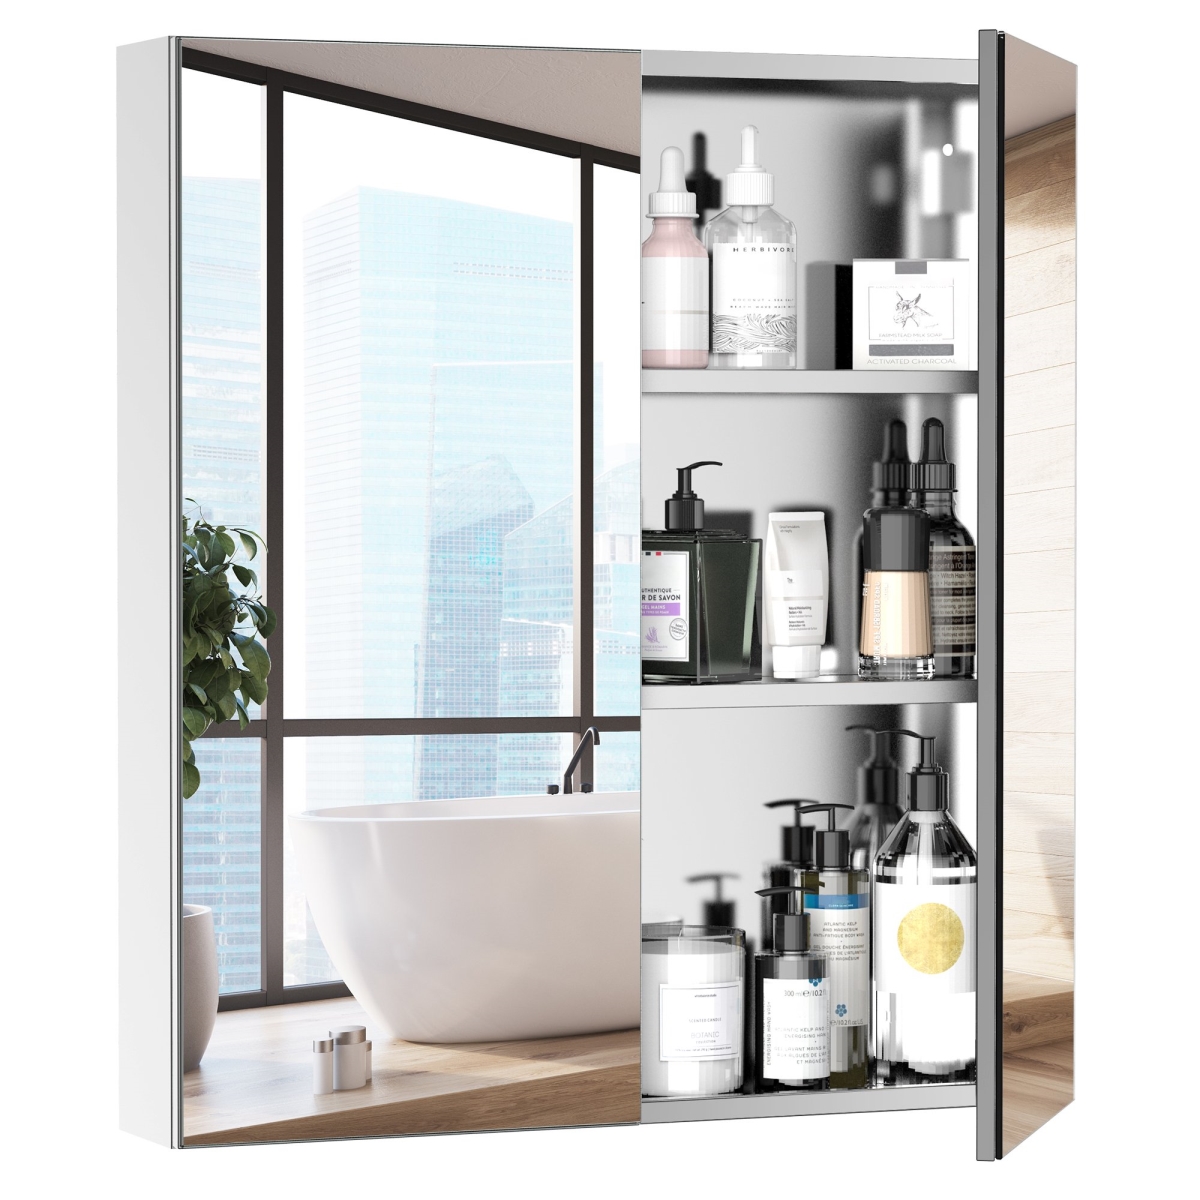 Picture of 212 Main 834-298 Kleankin Bathroom Mirror with Storage&#44; Bathroom Medicine Cabinet with 3-Tier Fixed Metal Shelves & Stainless Steel for Bathroom&#44; Silver